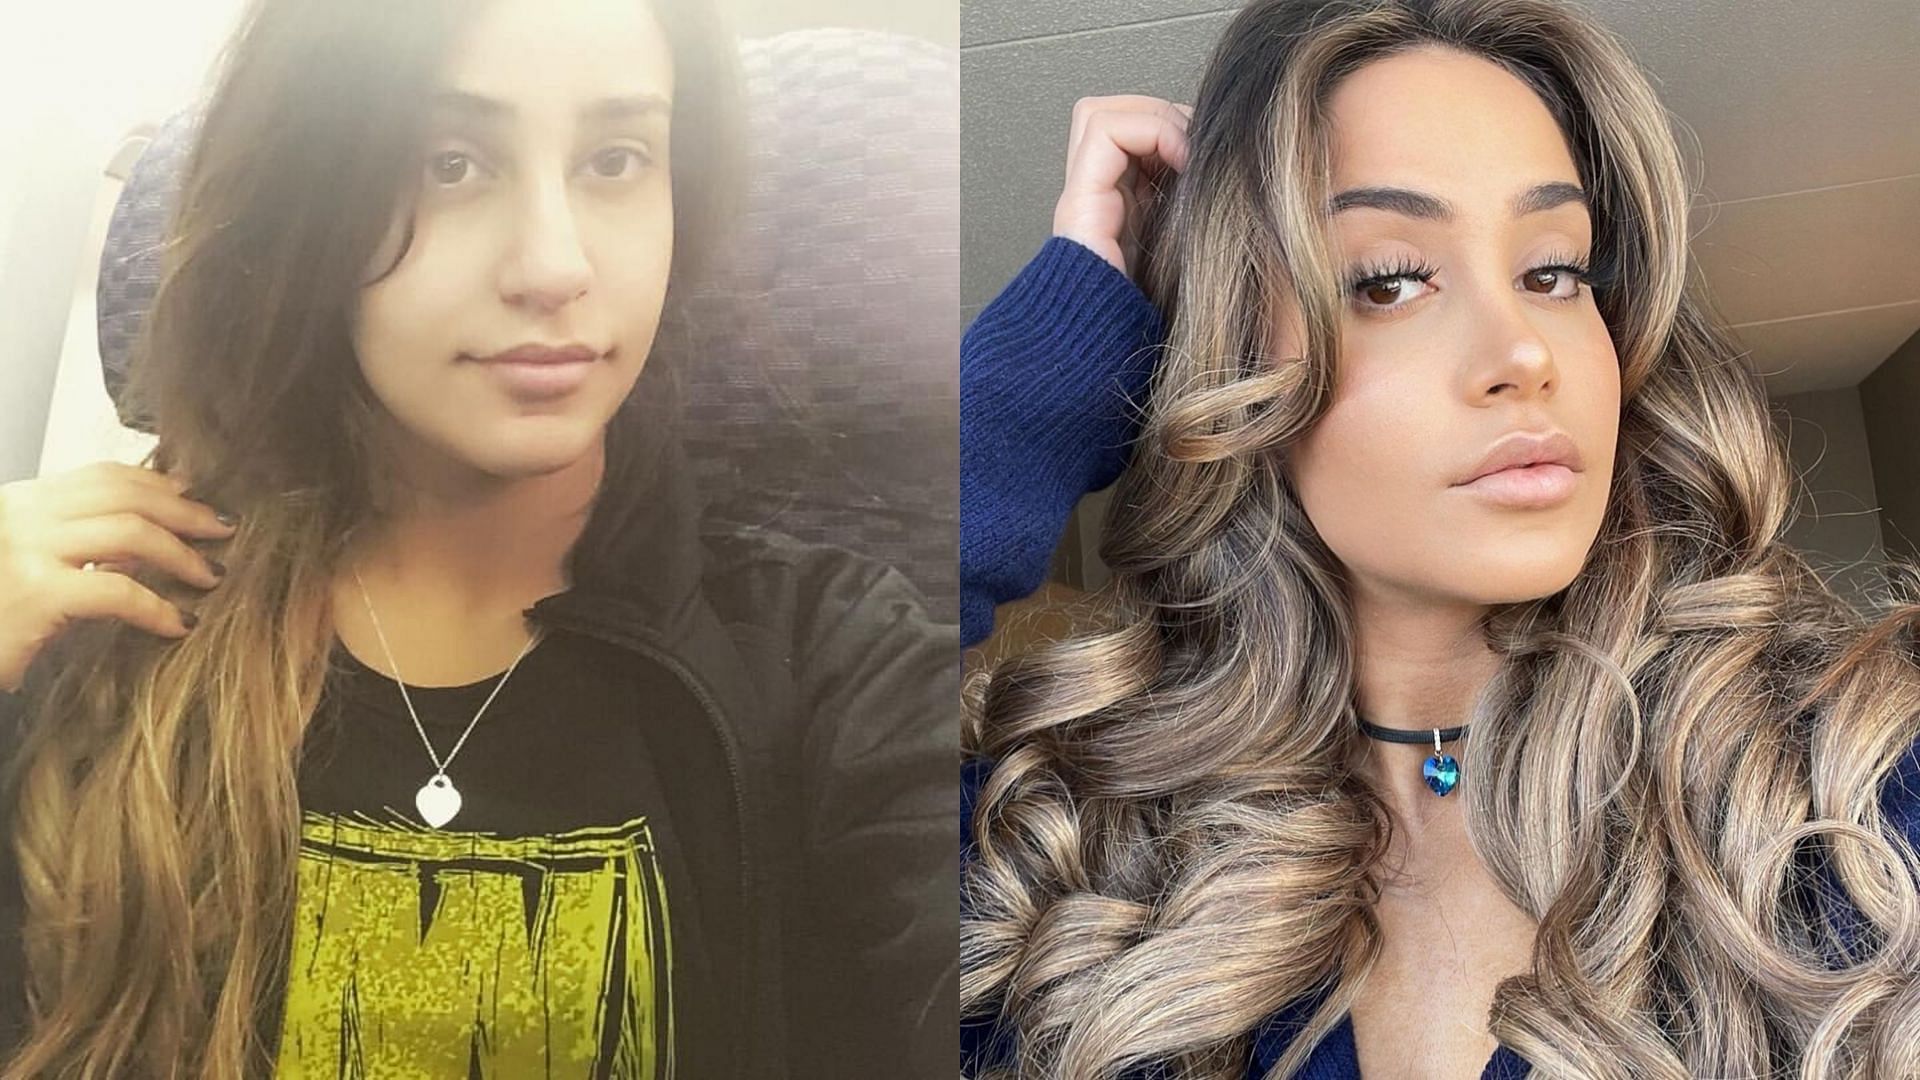 Aliyah without makeup (left) and with makeup (right)